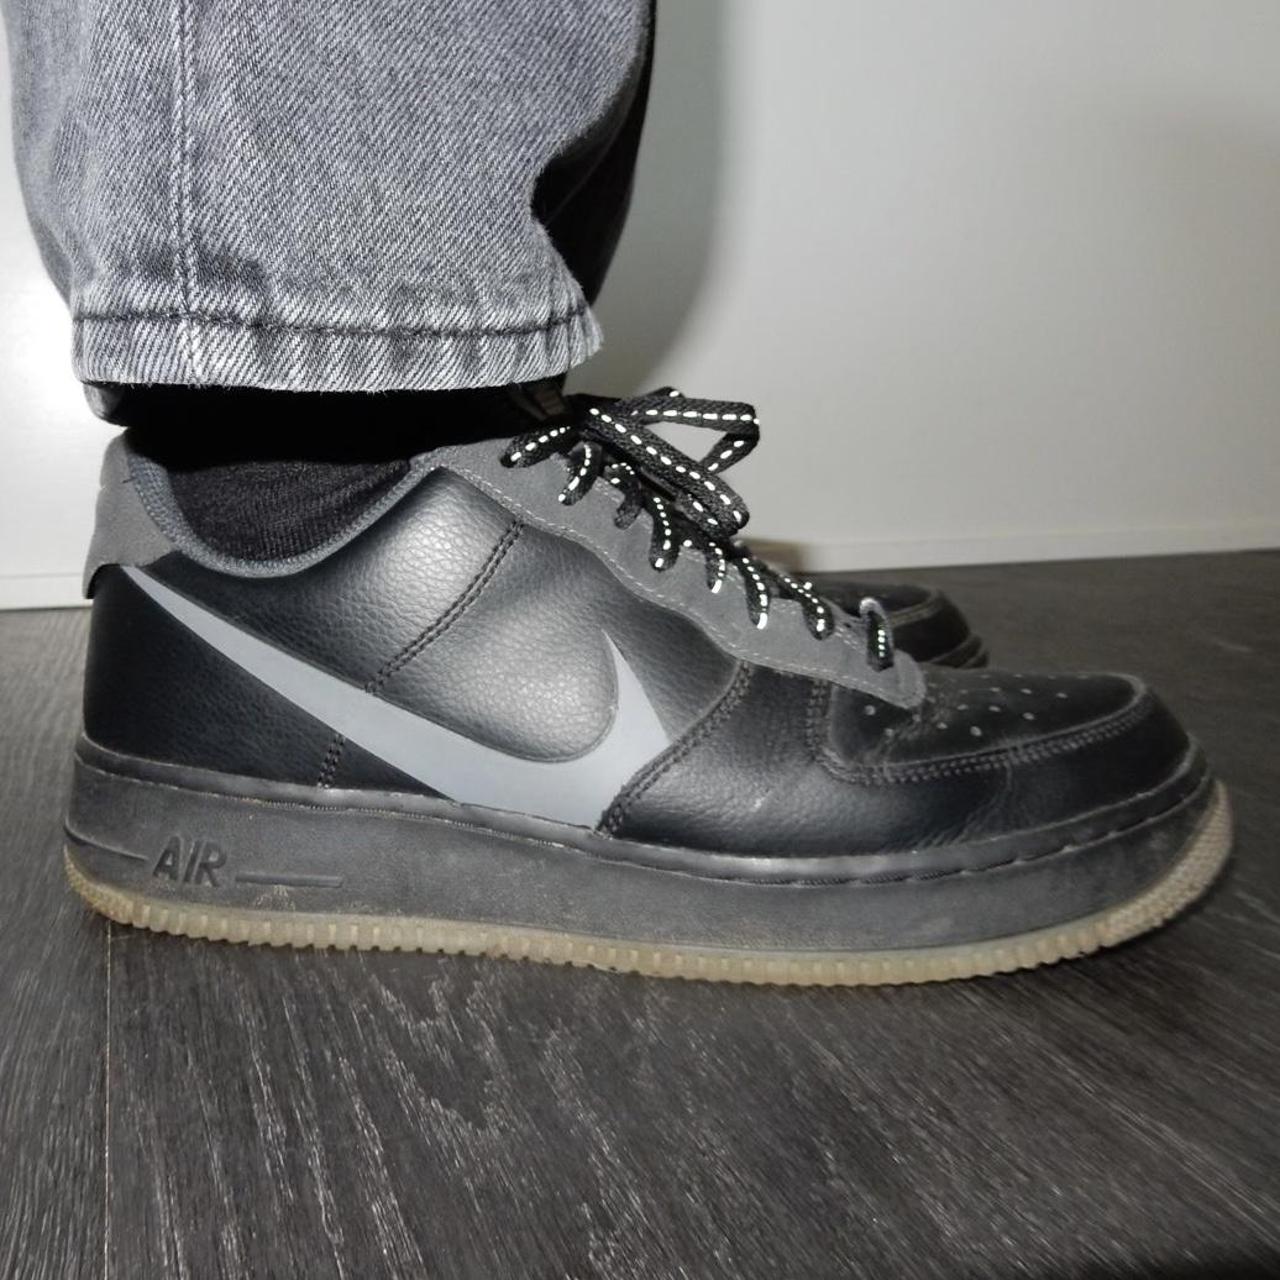 NIKE AIR FORCE 1 LOW ‘07 LV8 BLACK ANTHRACITE, Size